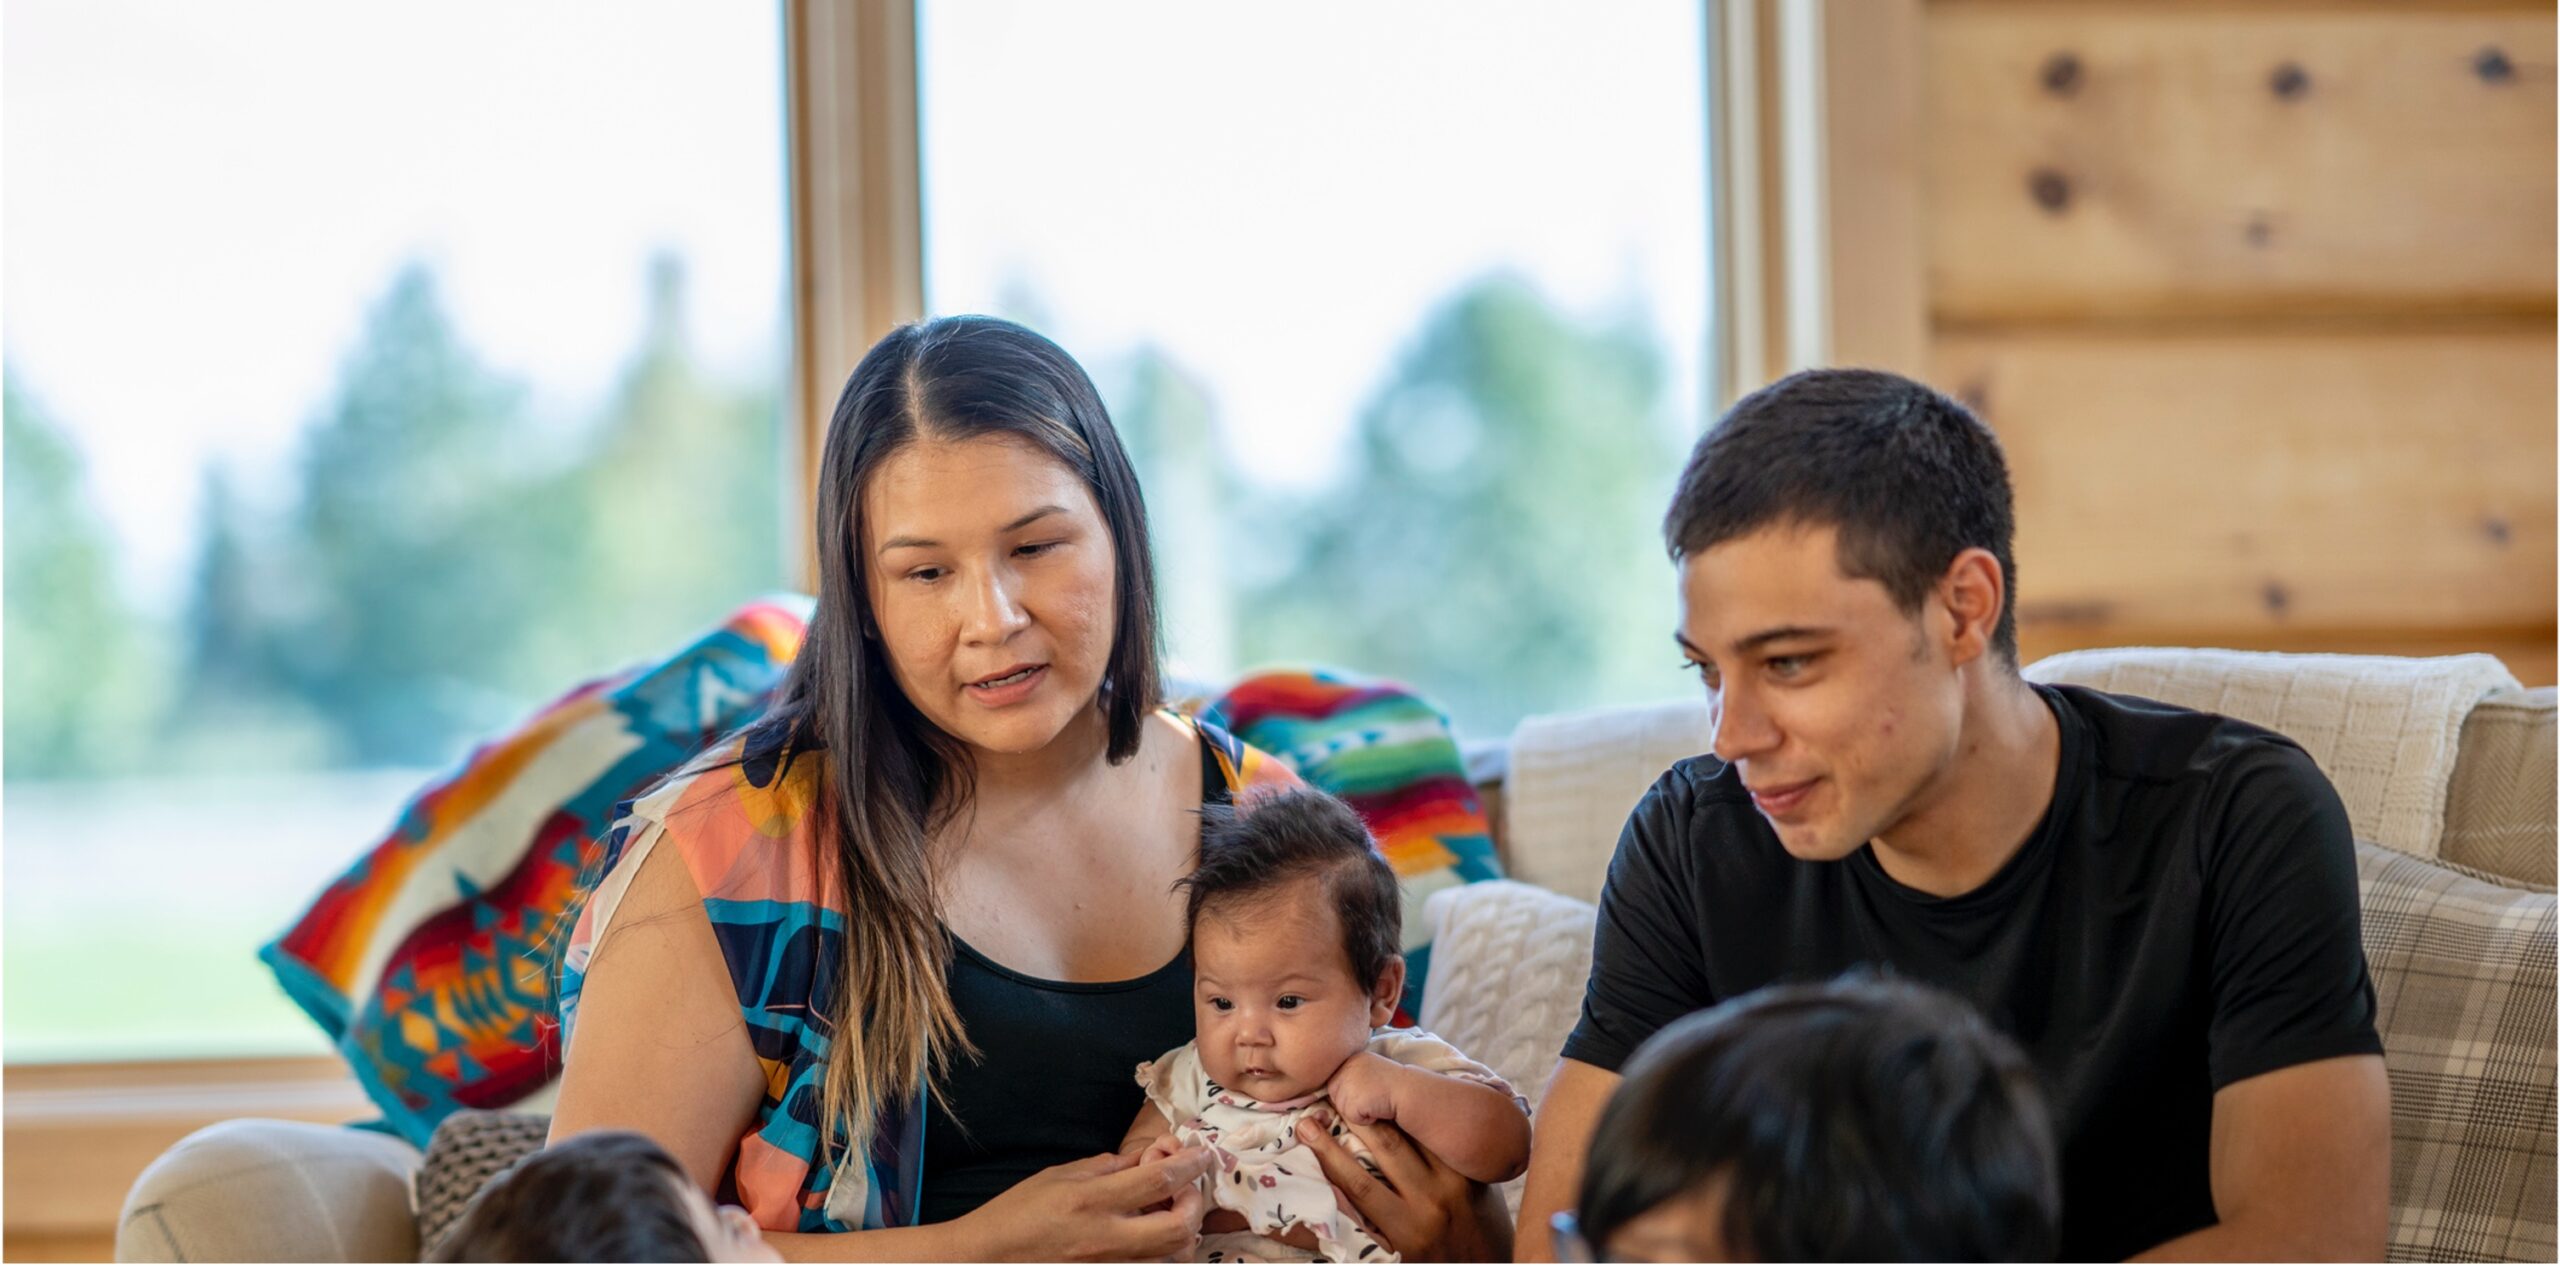 indigenous mom and dad and baby sitting on couch